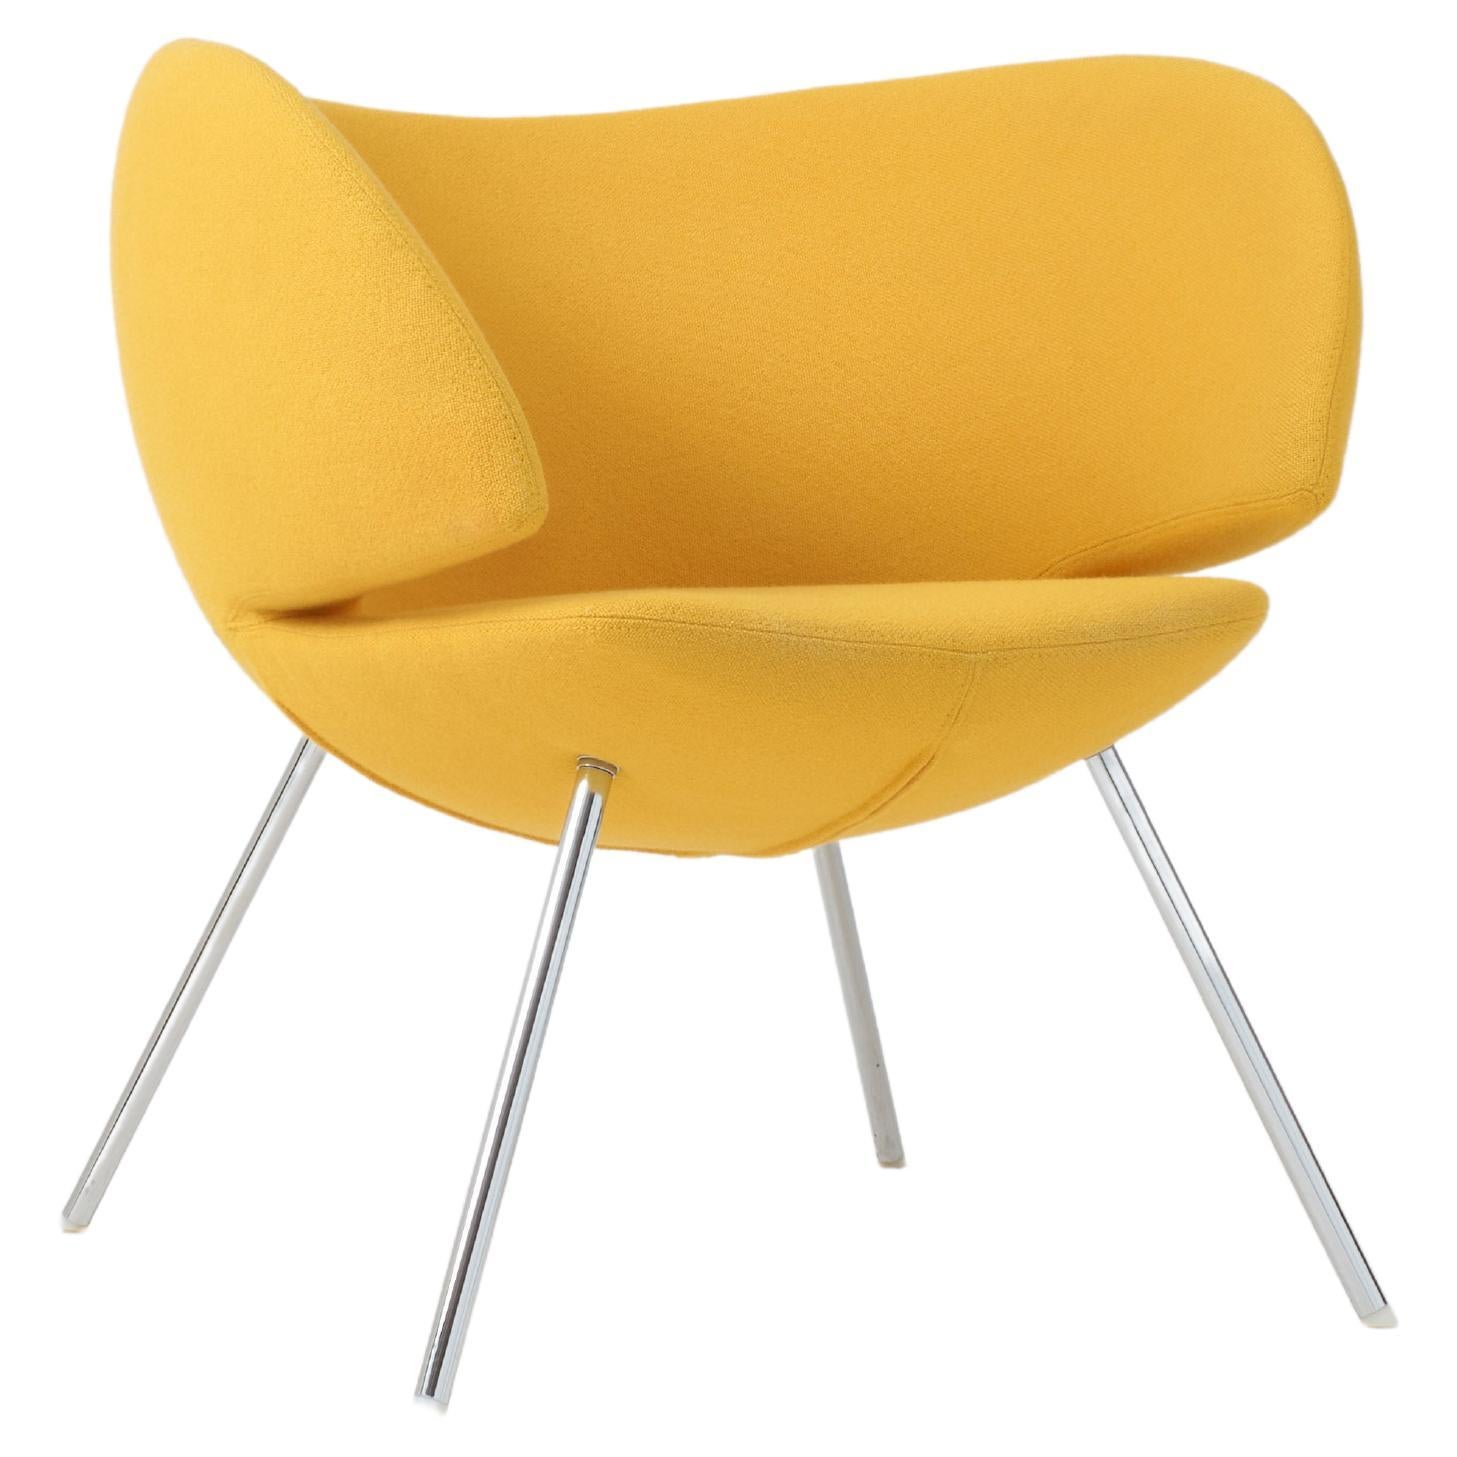 Pinq Lounge chair designed by René Holten for Artifort